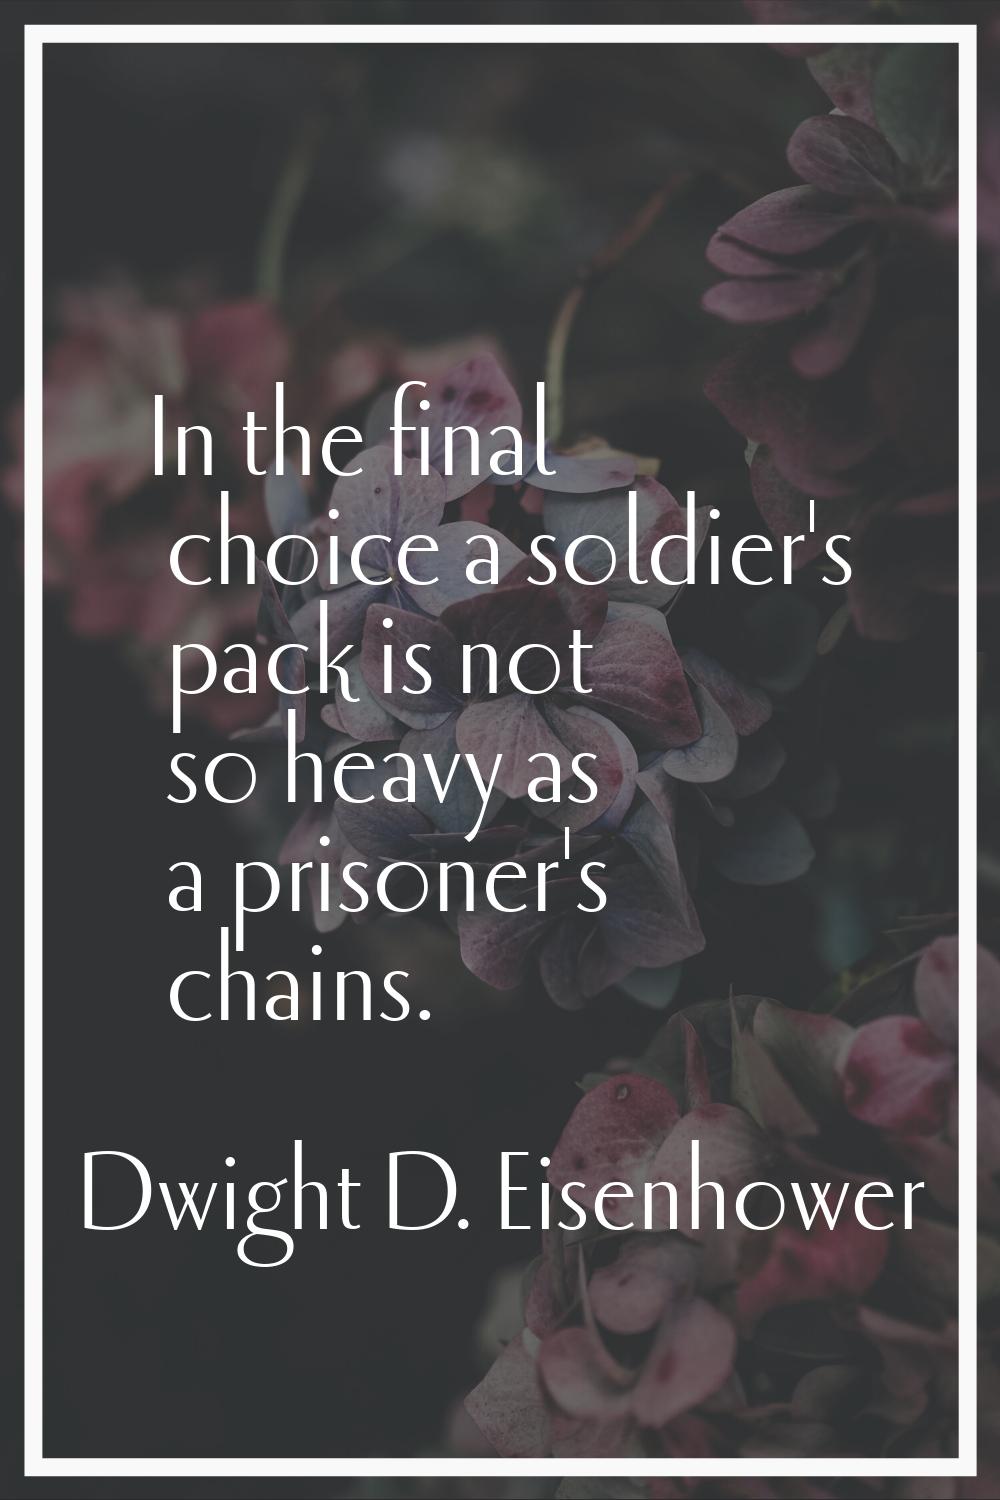 In the final choice a soldier's pack is not so heavy as a prisoner's chains.